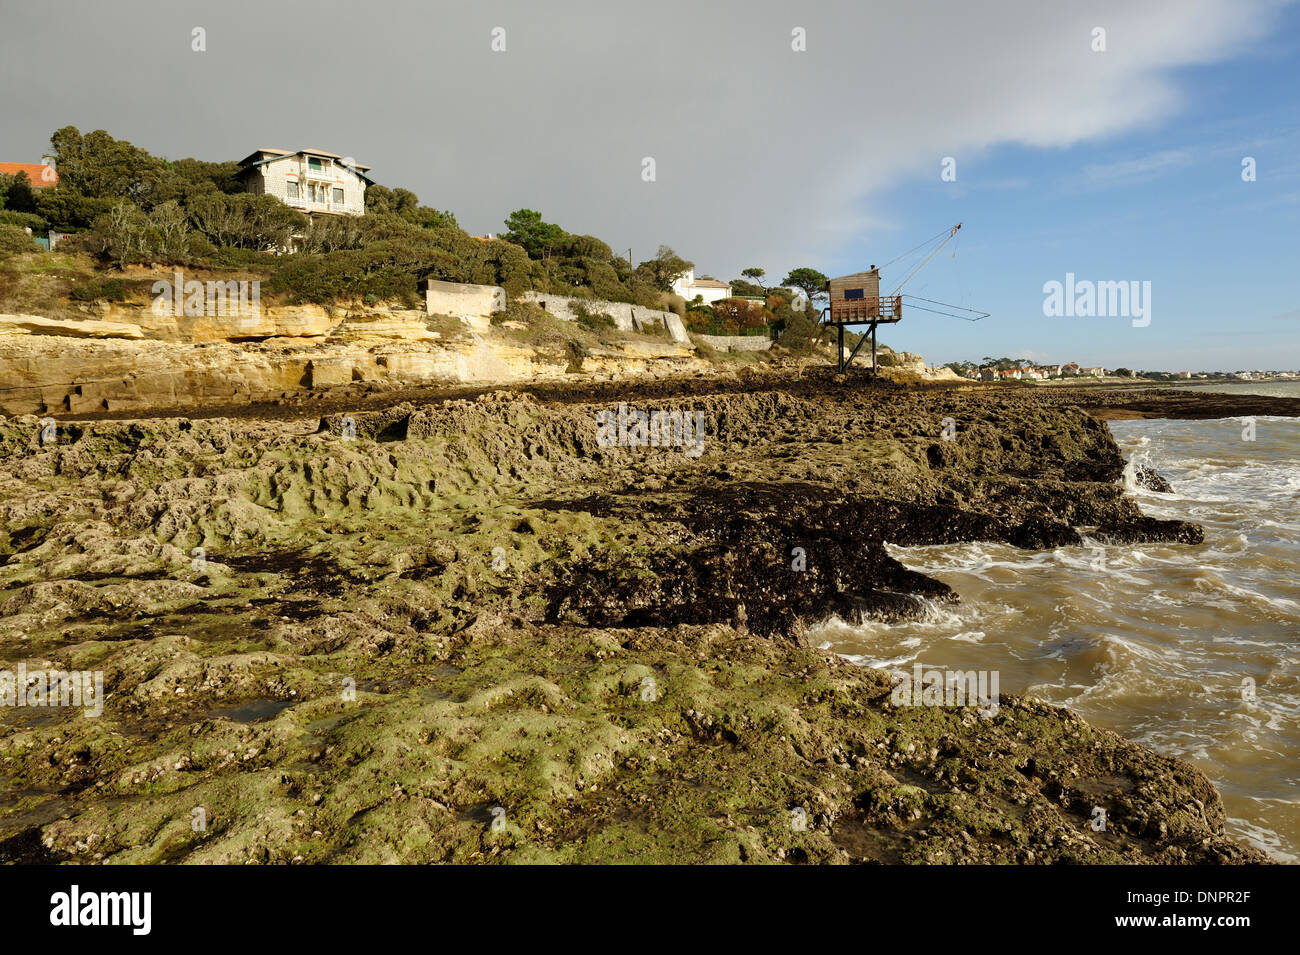 Houses built along the rocky part of the coast of Gironde estuary mouth in Charente-Maritime, France Stock Photo